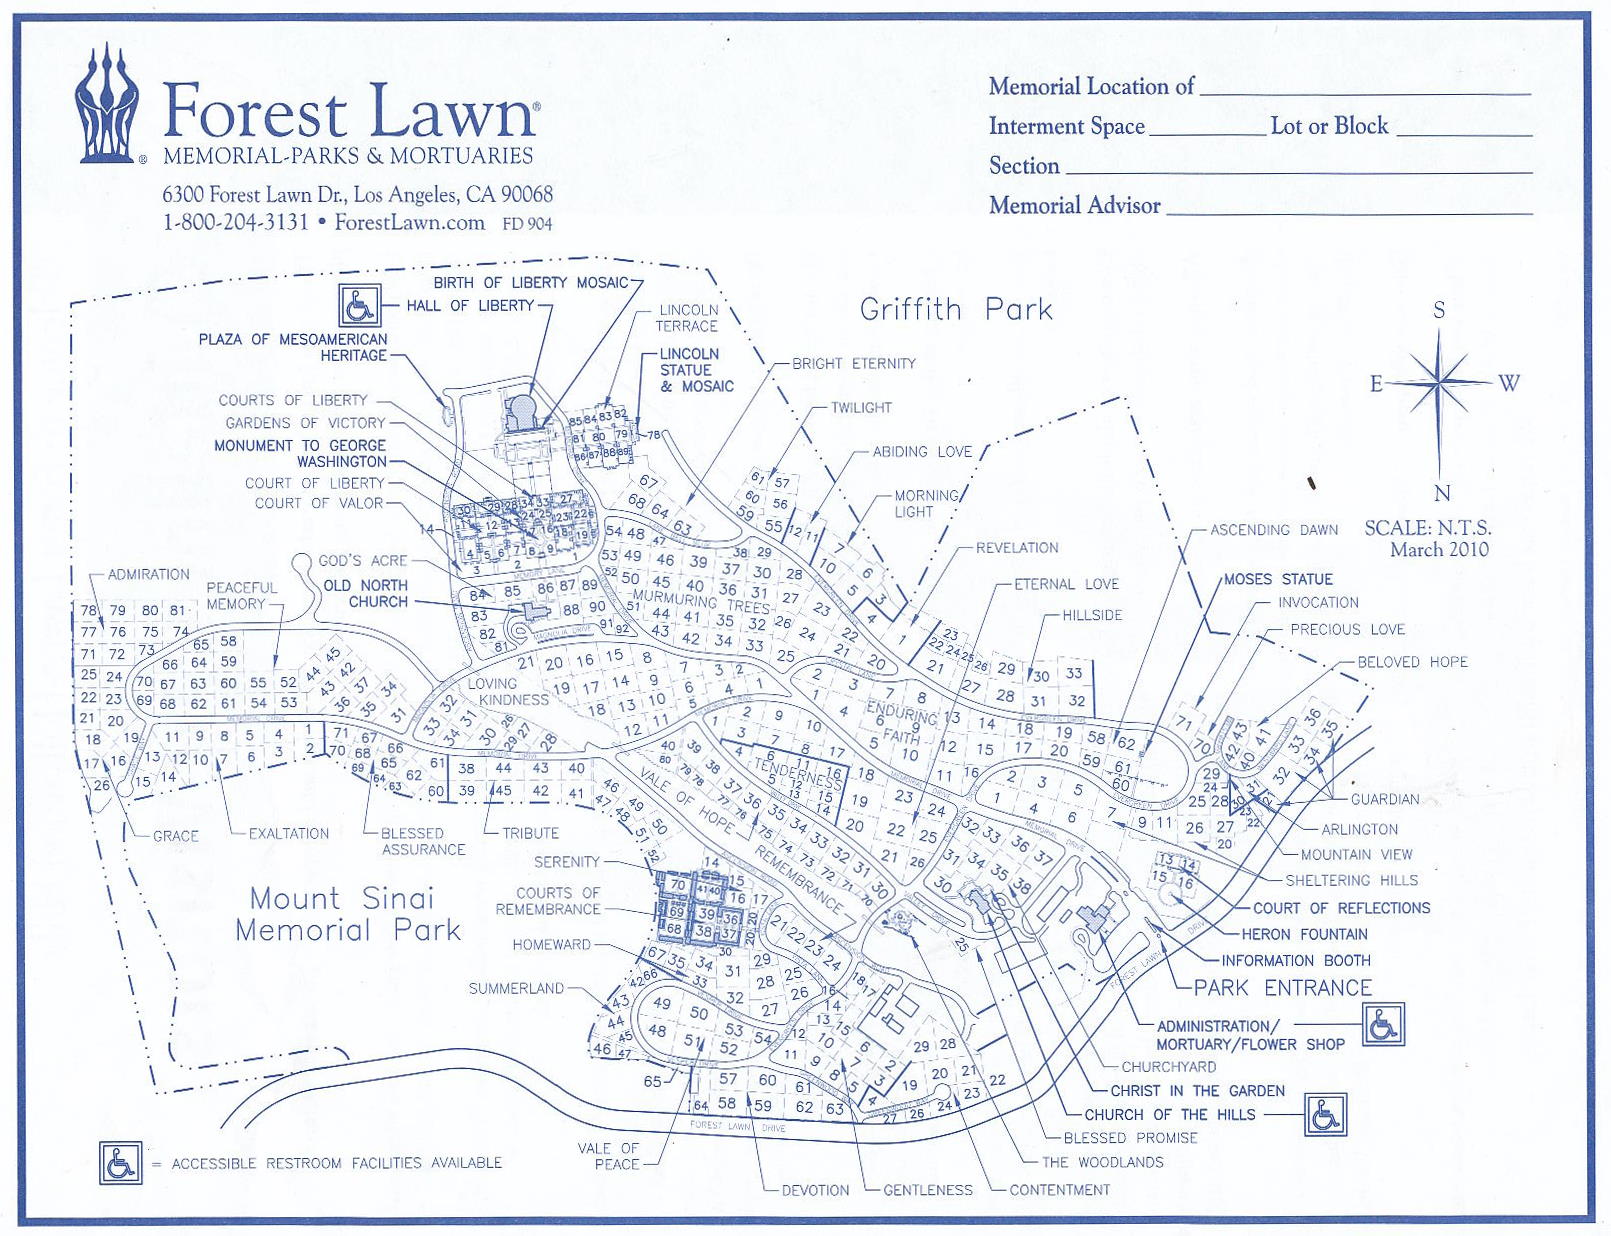 Map of Forest Lawn Memorial Park - Hollywood Hills in Los Angeles, California